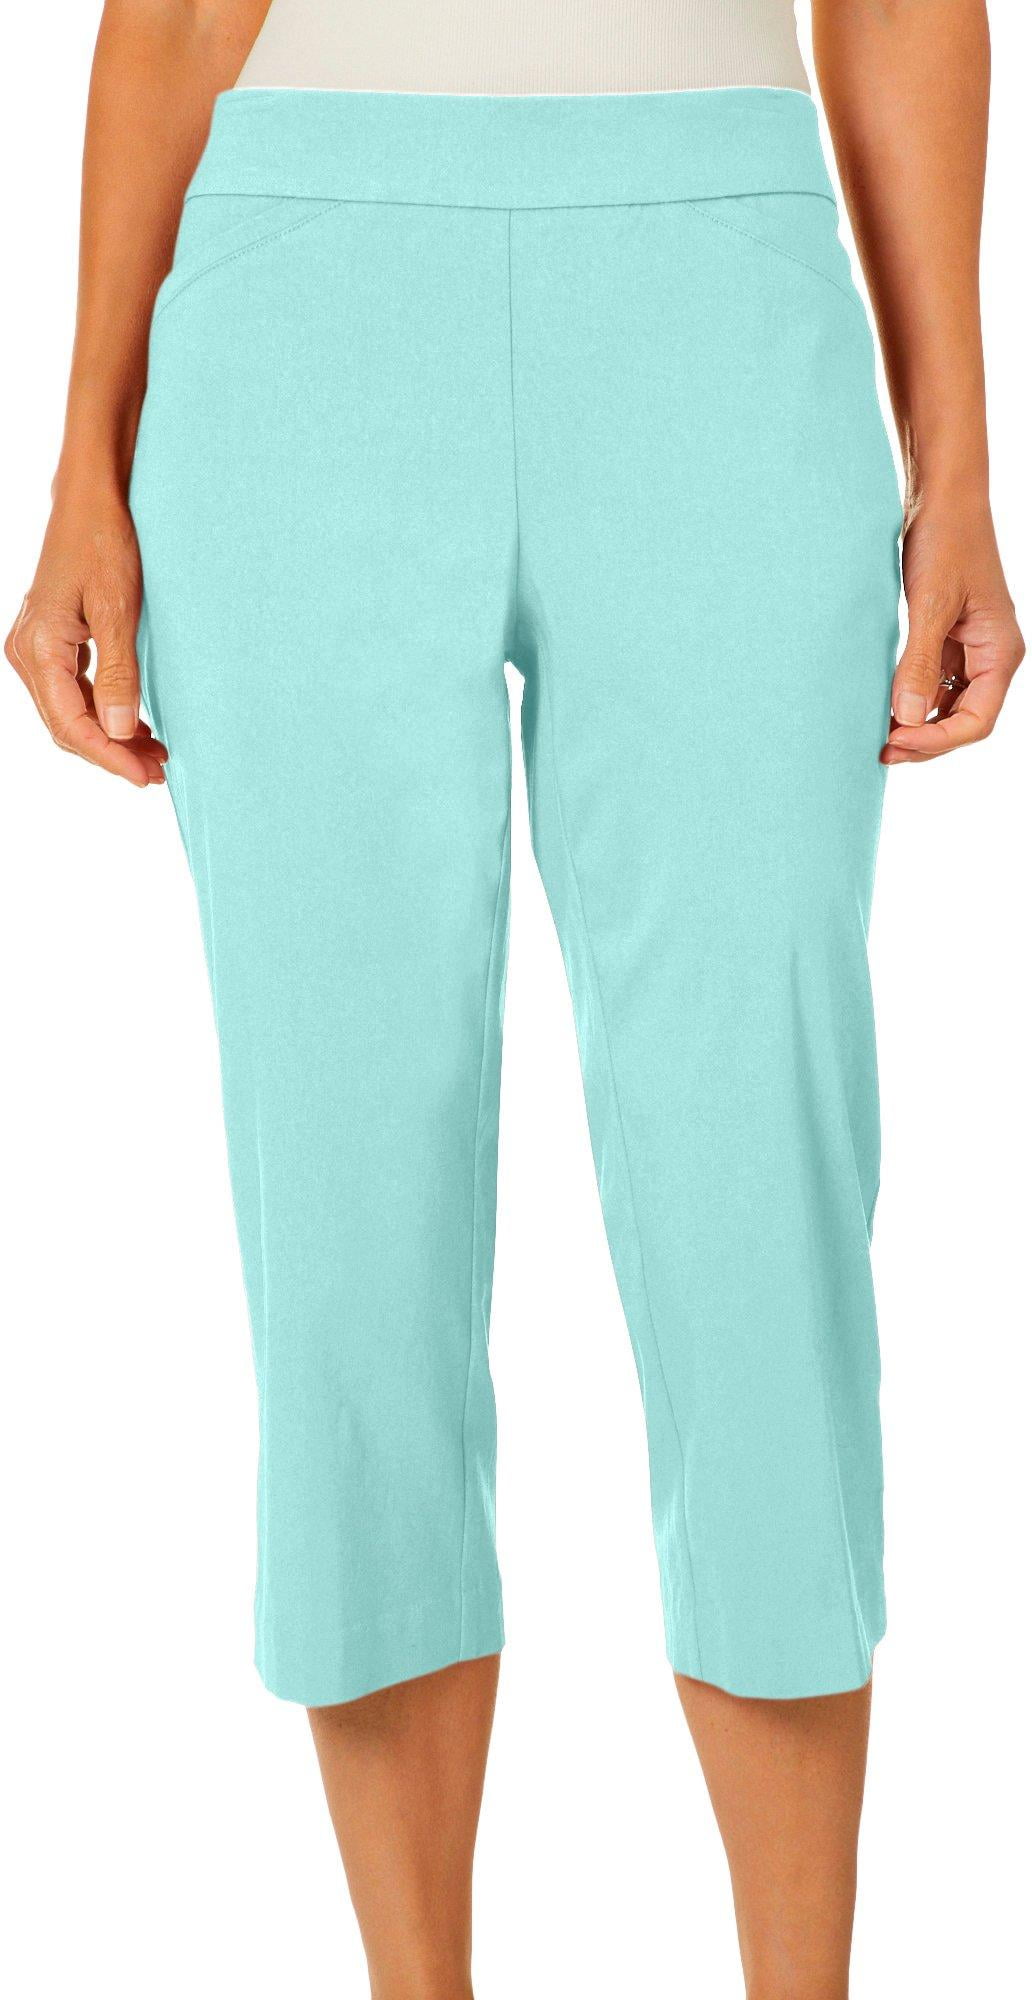 Coral Bay - Coral Bay Womens Millennium Pull On Capris 18 Mint green ...